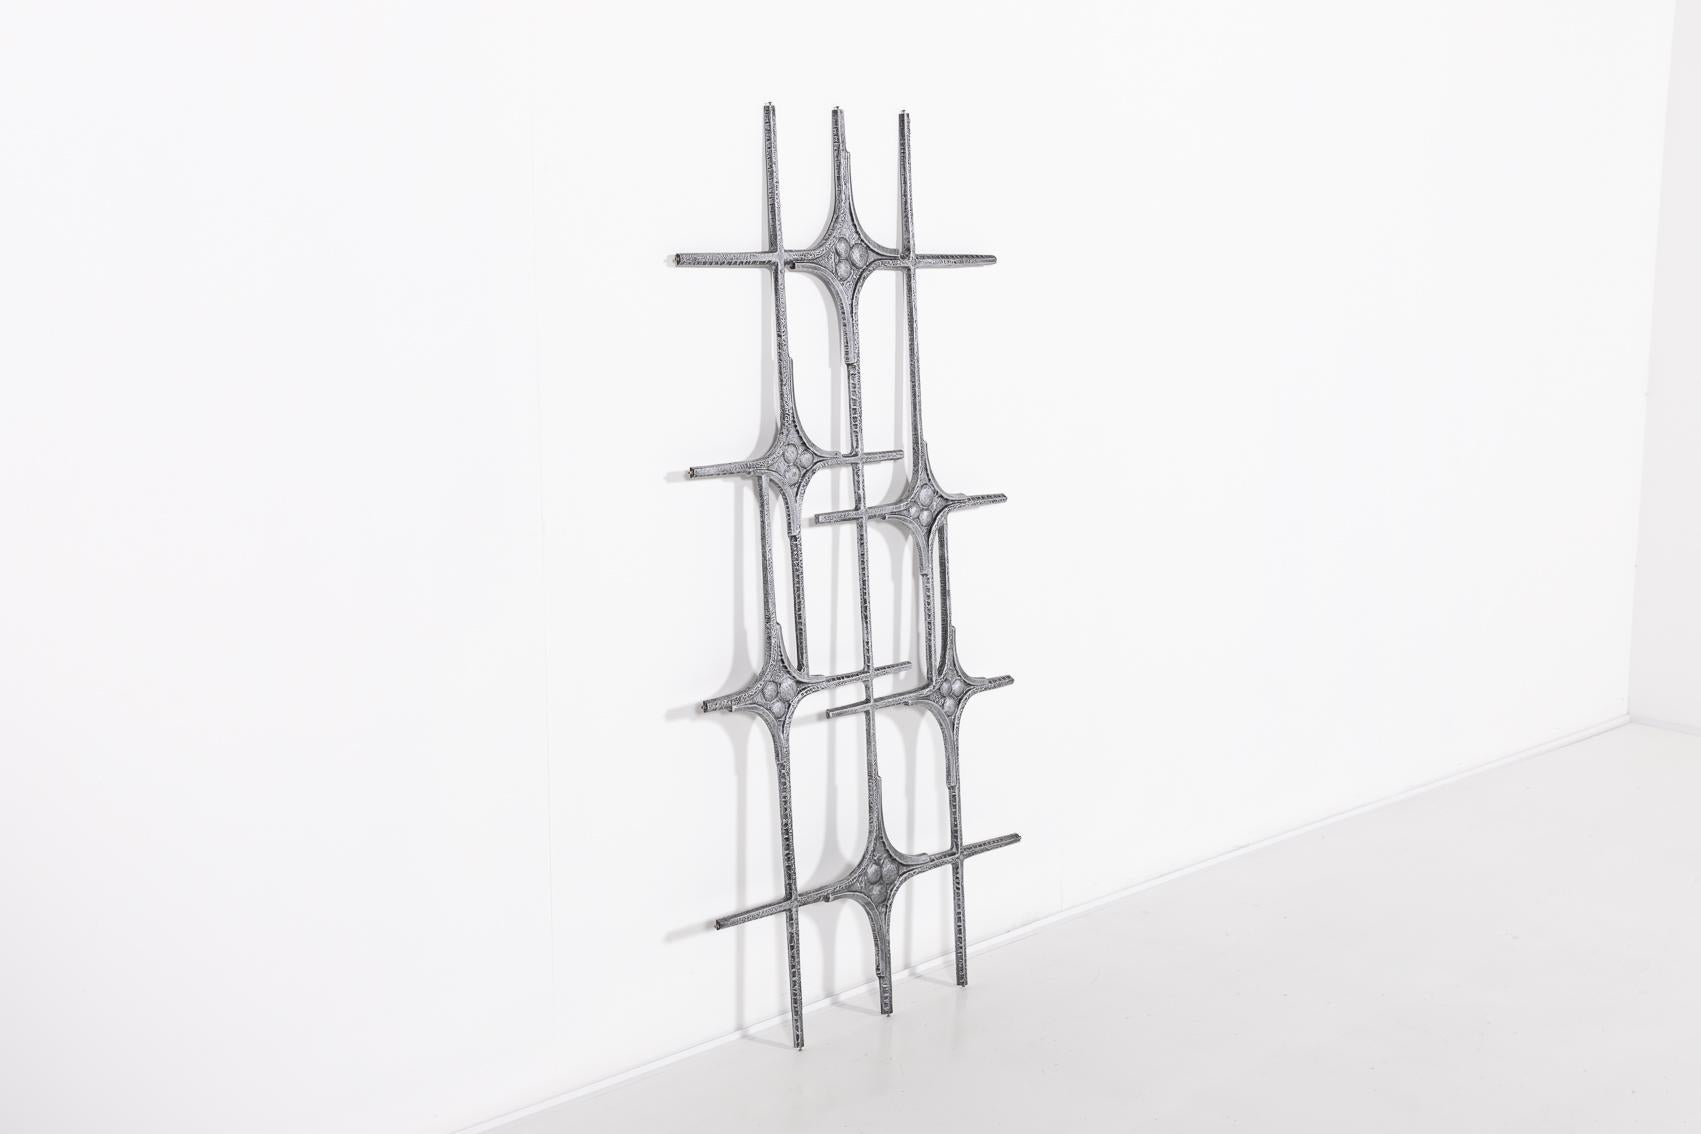 1980’s Brutalist casted and coated aluminium door fixture/decoration. It can also be used as spectacular wall art sculpture horizontally or vertically.

Condition
Good, usage wear

Dimensions
width: 72 cm
depth: 1,5 cm
height: 154,5 cm

